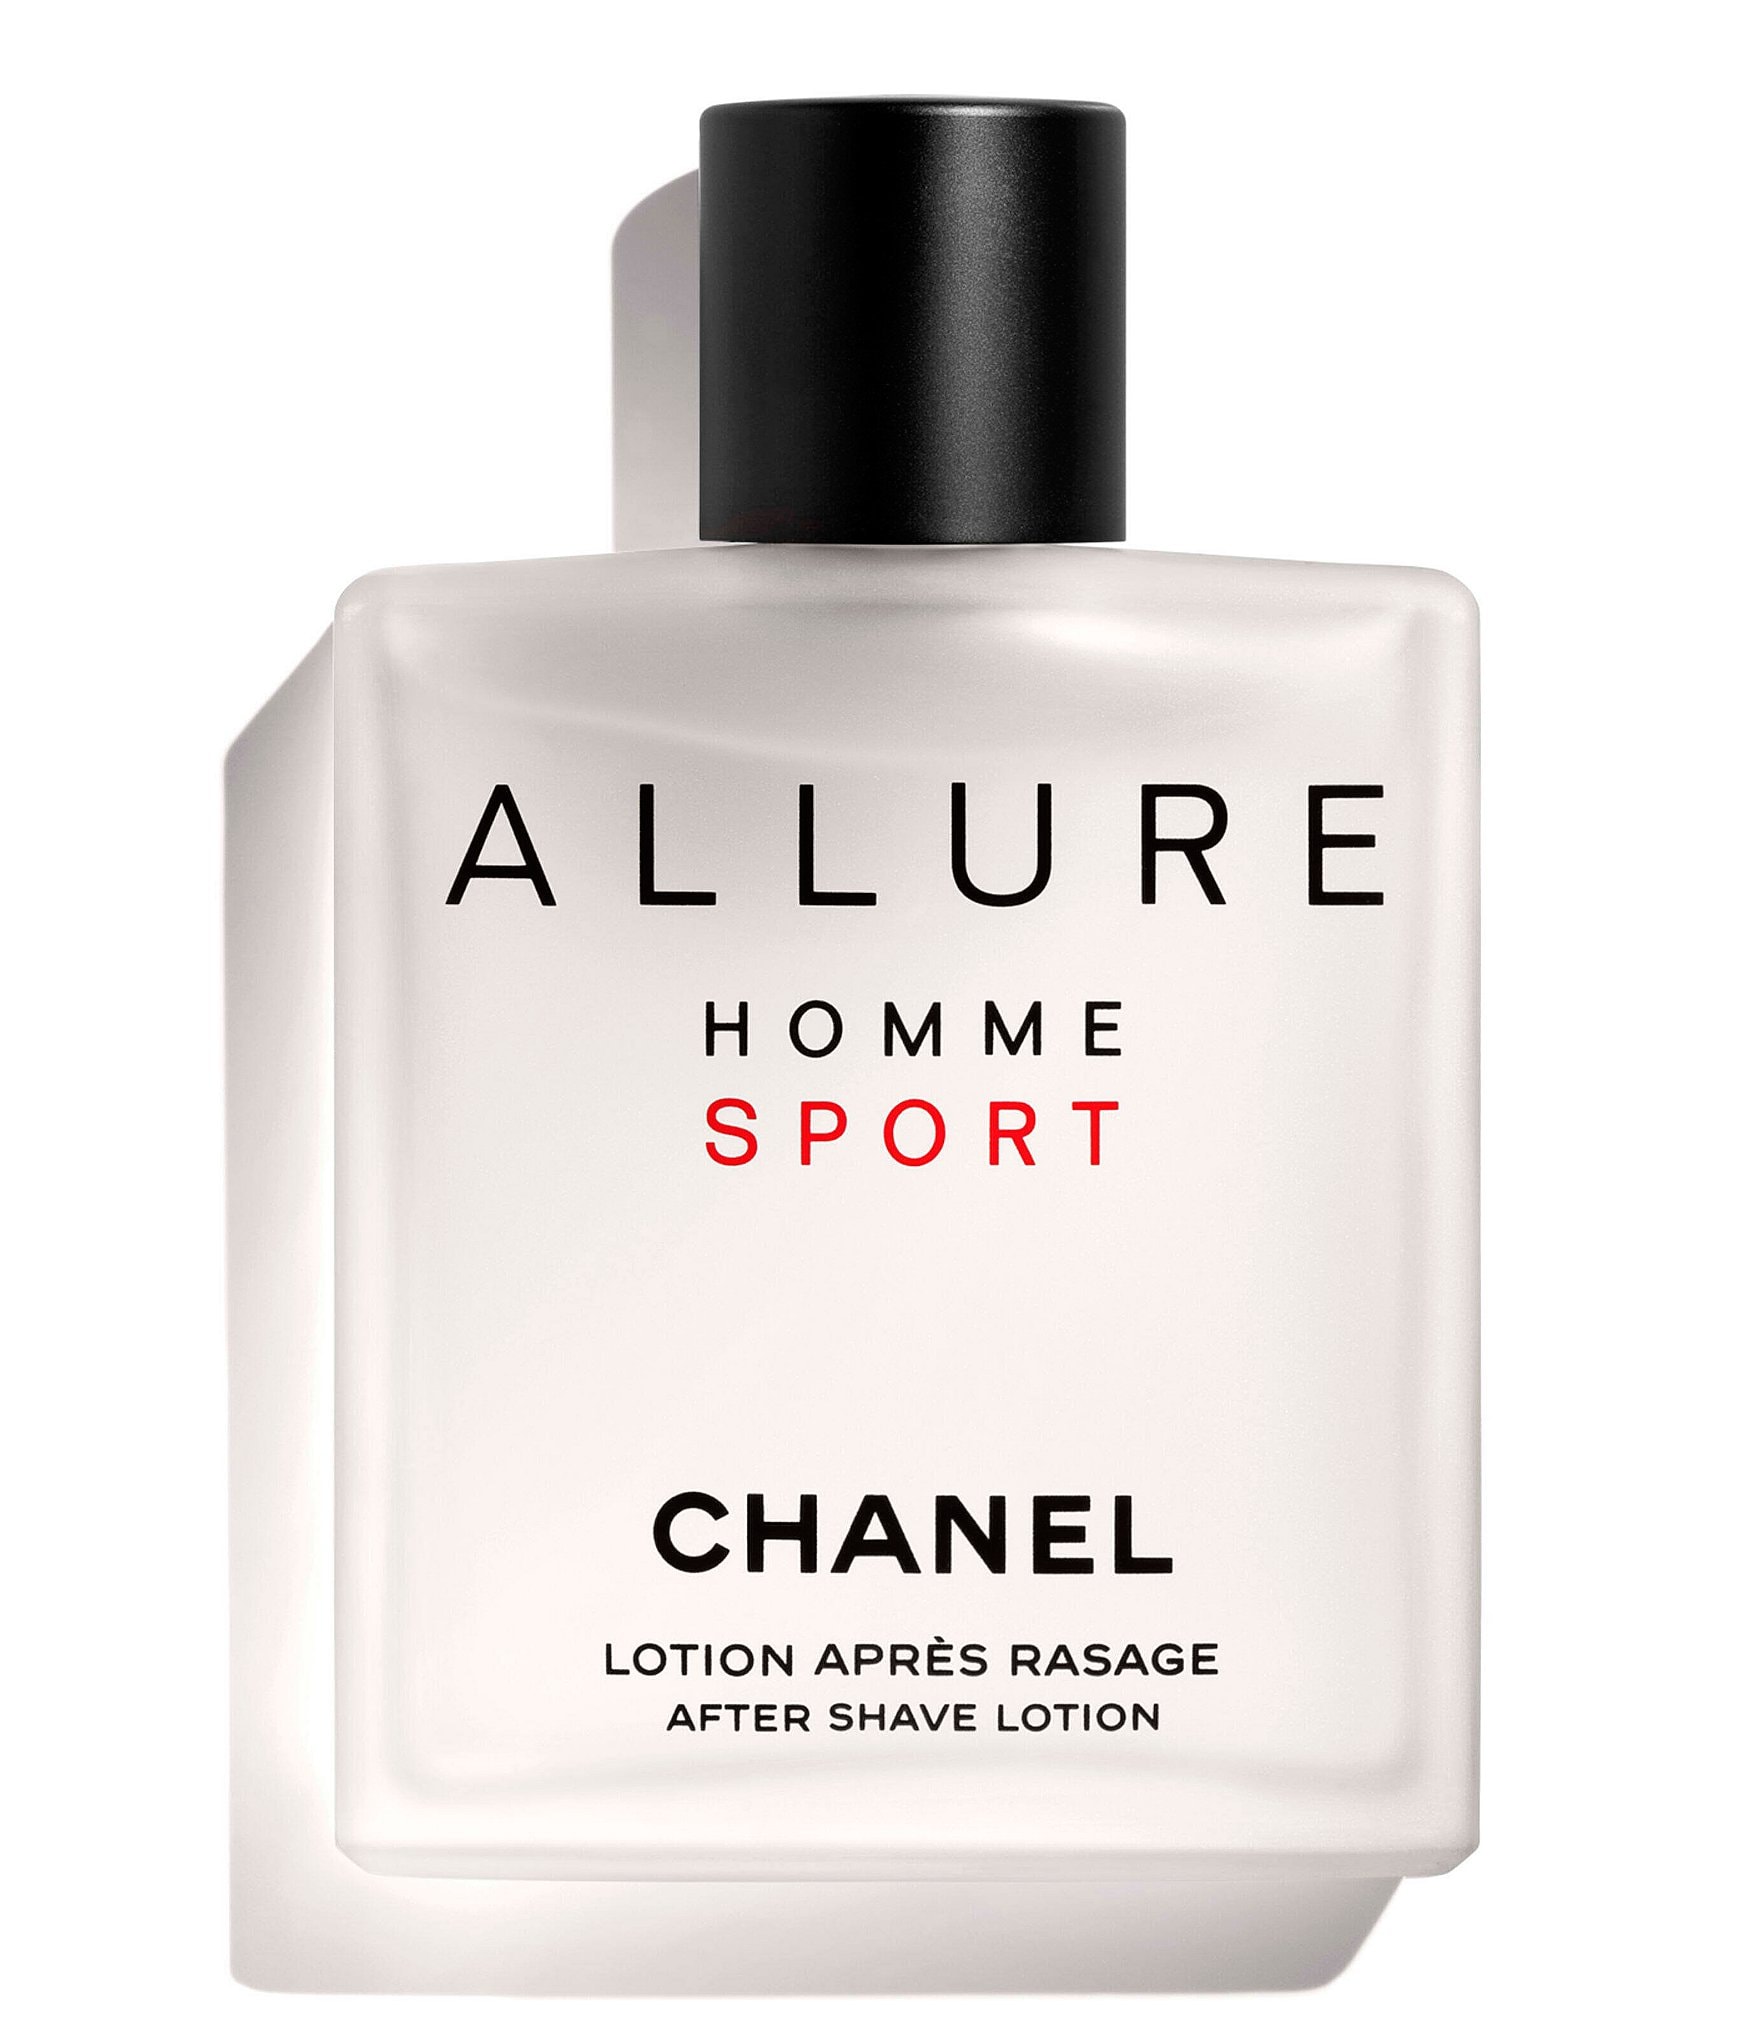 9 Of The Best Chanel Cologne For Men To Add To Your Grooming Rotation  Updated 2023  FashionBeans